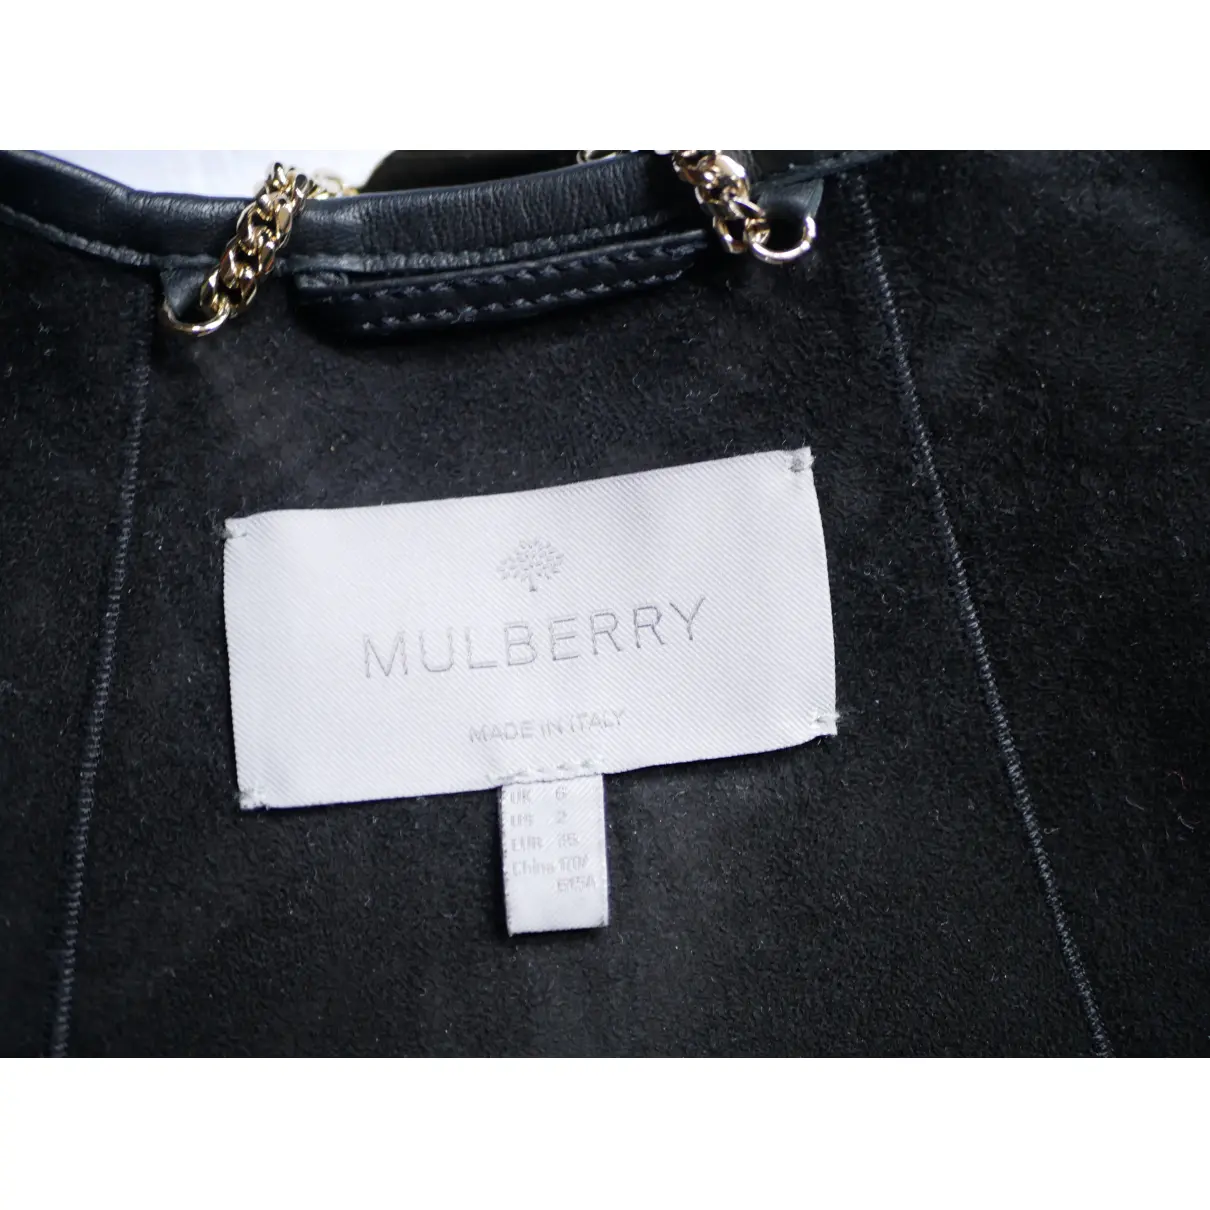 Shearling coat Mulberry